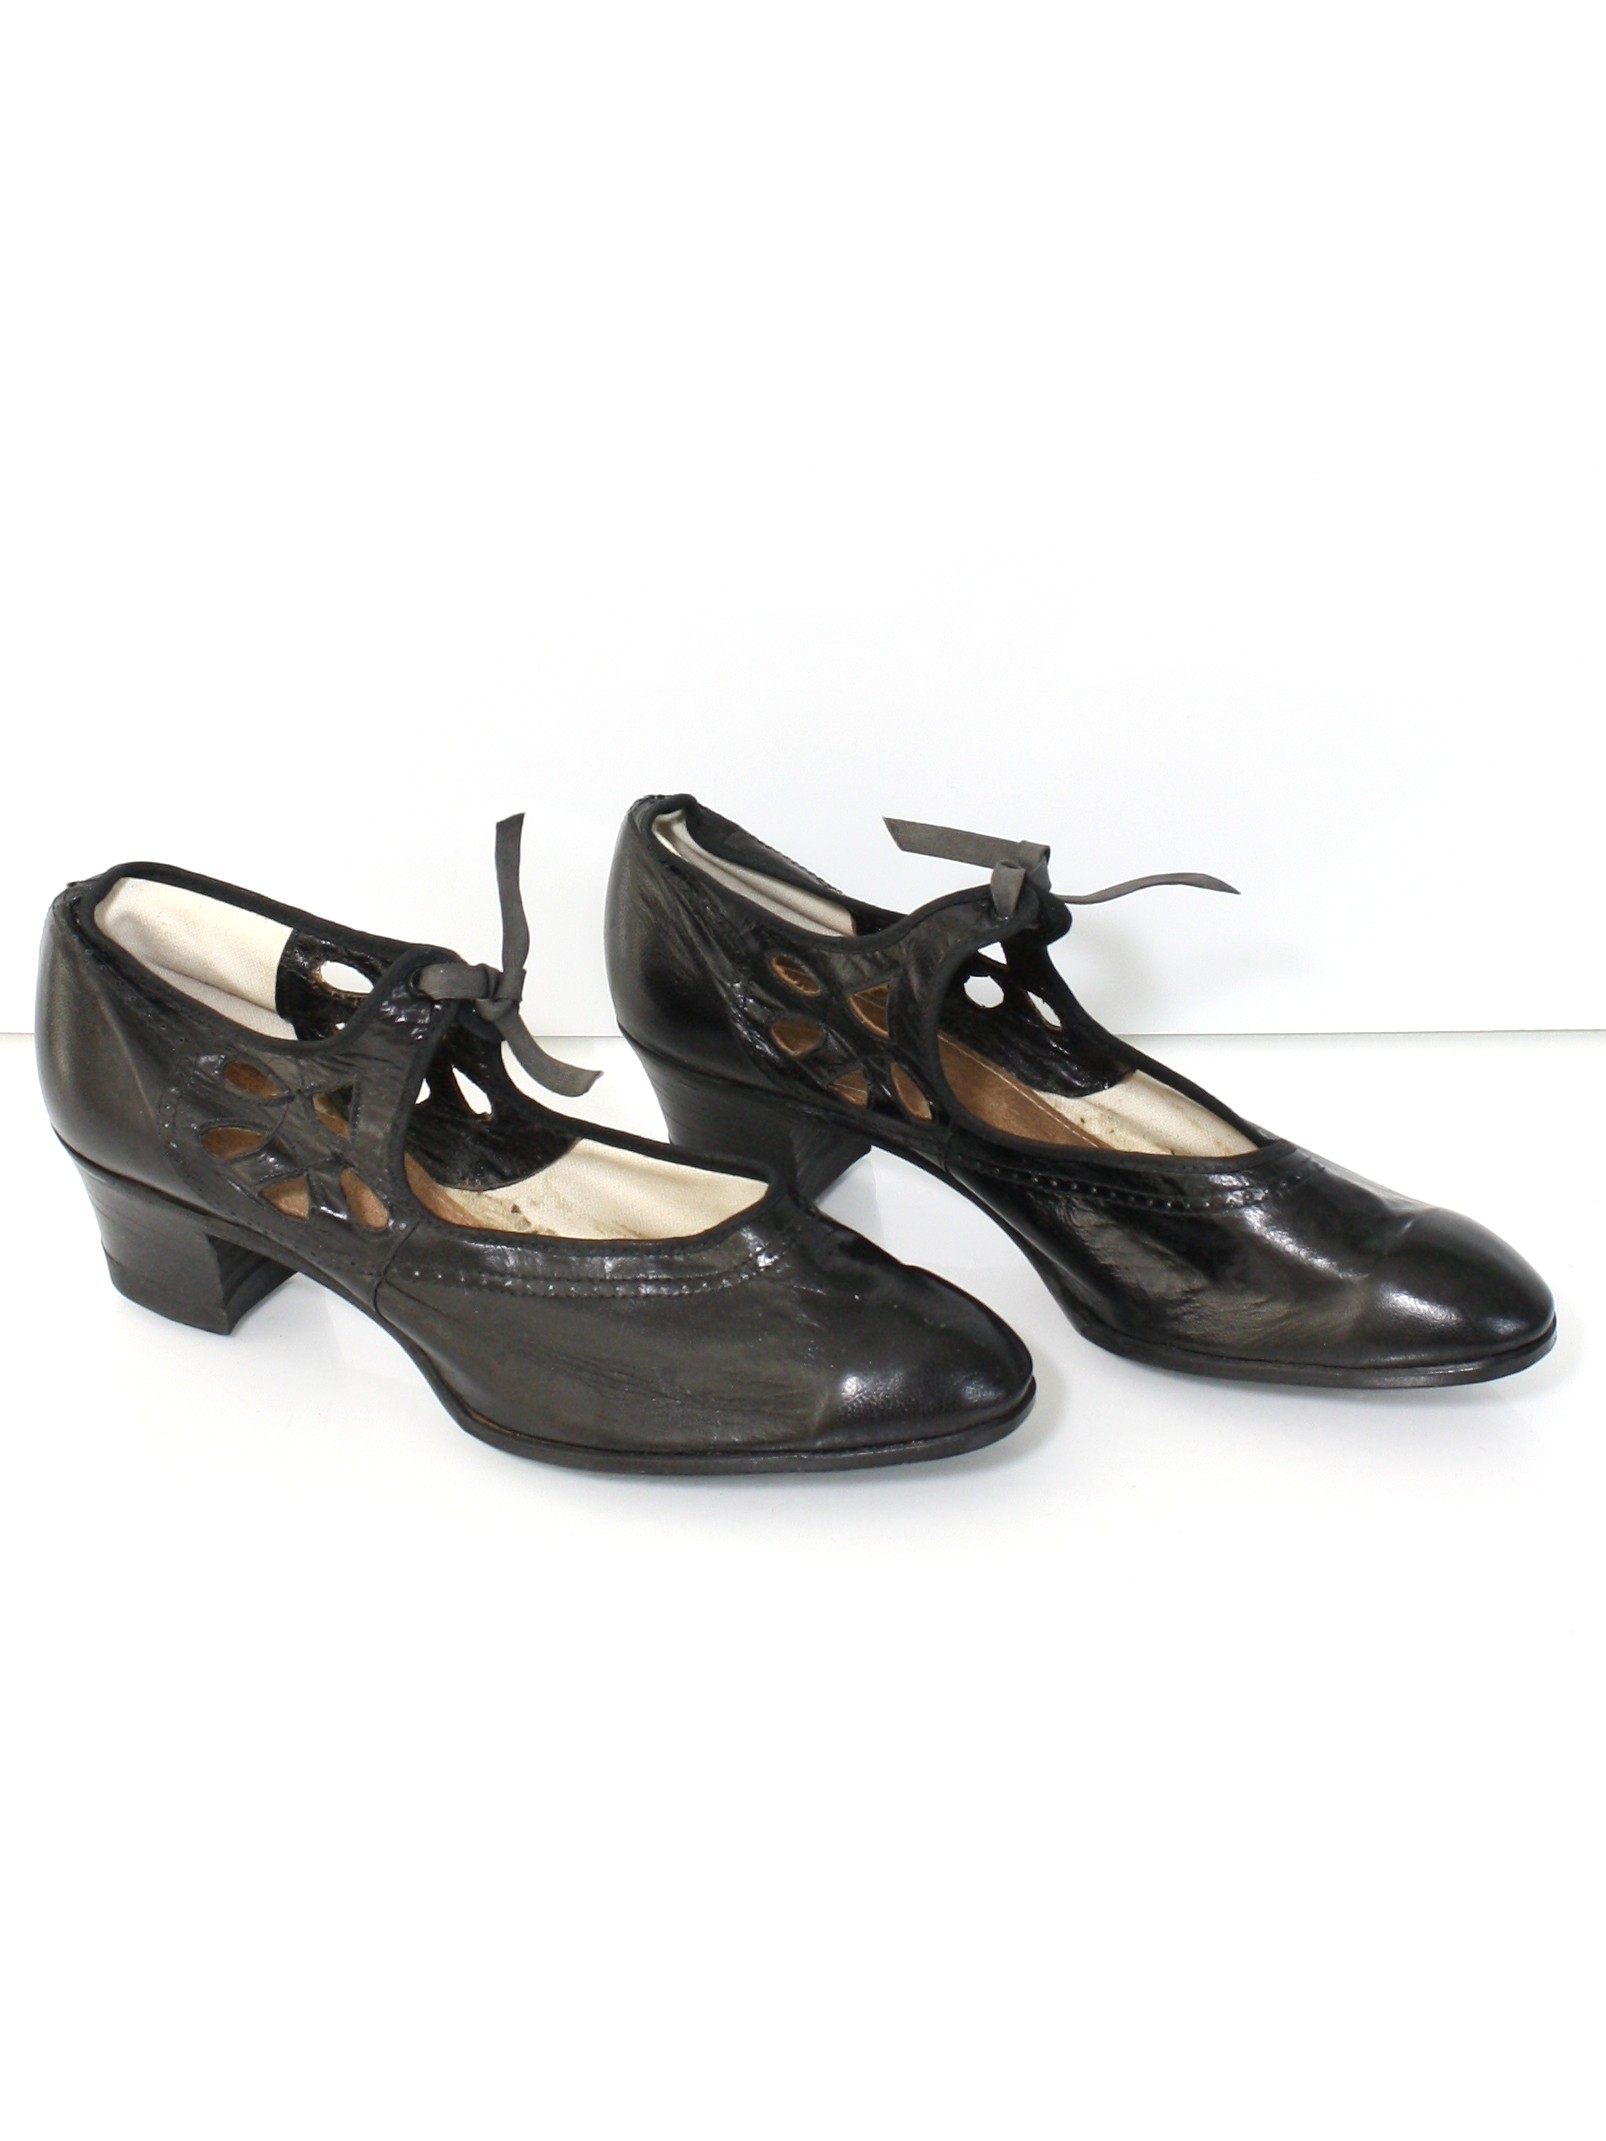 1920s womens shoes